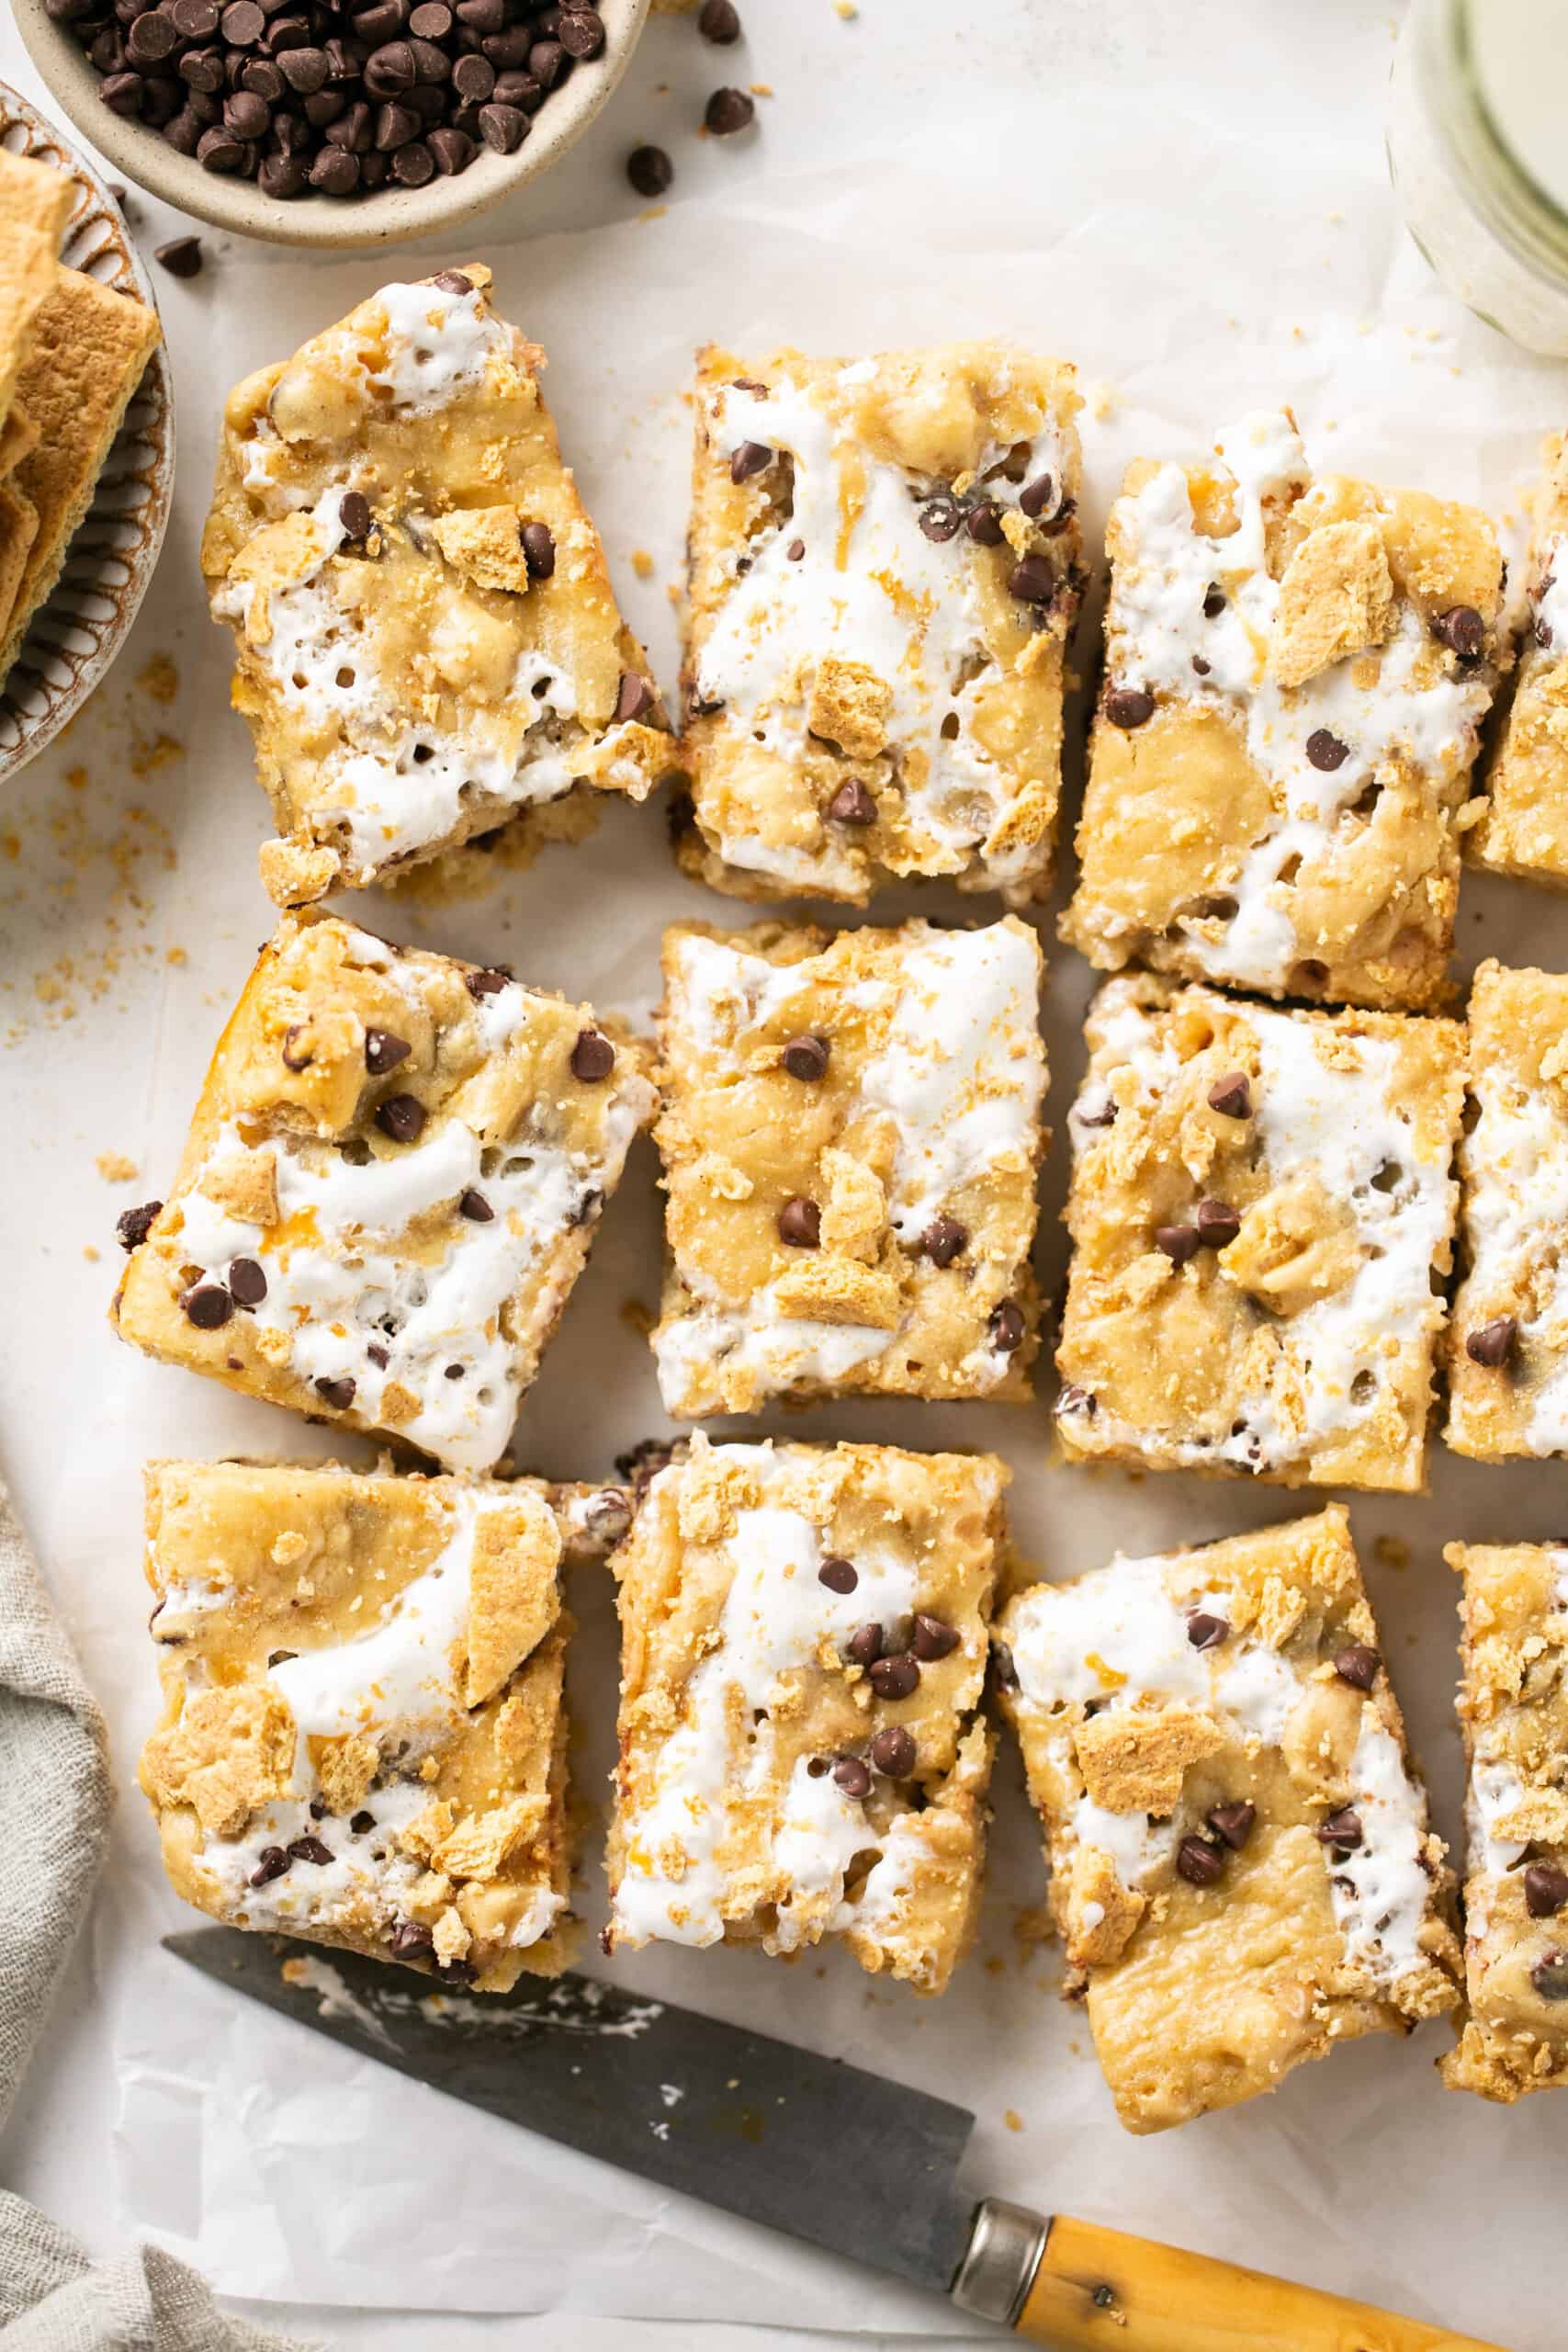 S'mores blondie bars on parchment paper.